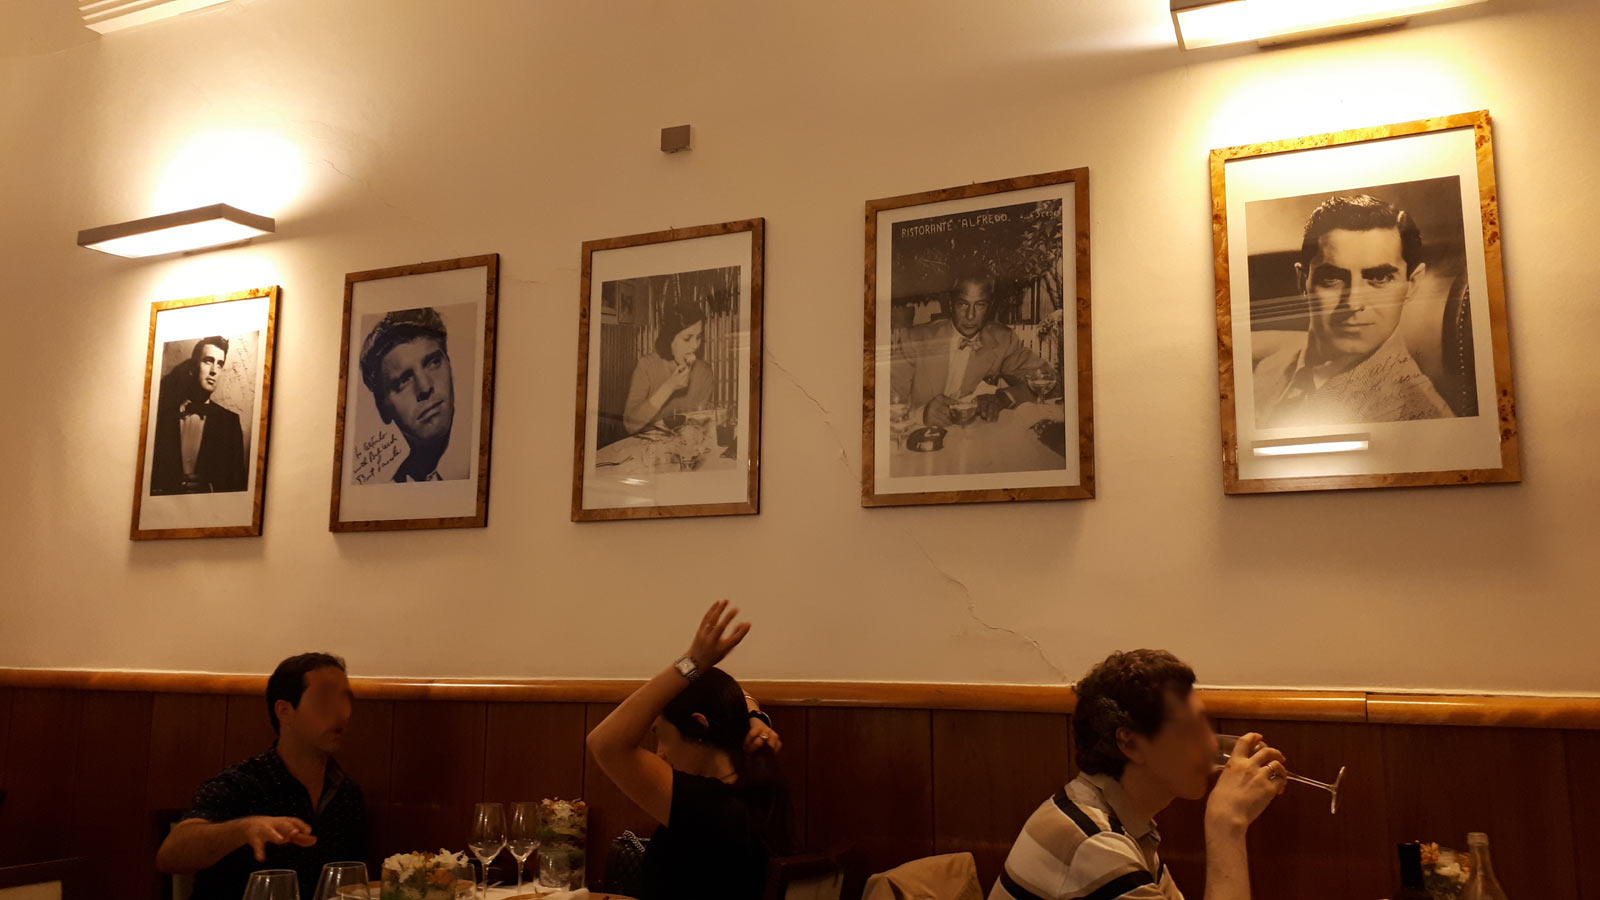 Pictures of famous people who visited the Alfredo Restaurant